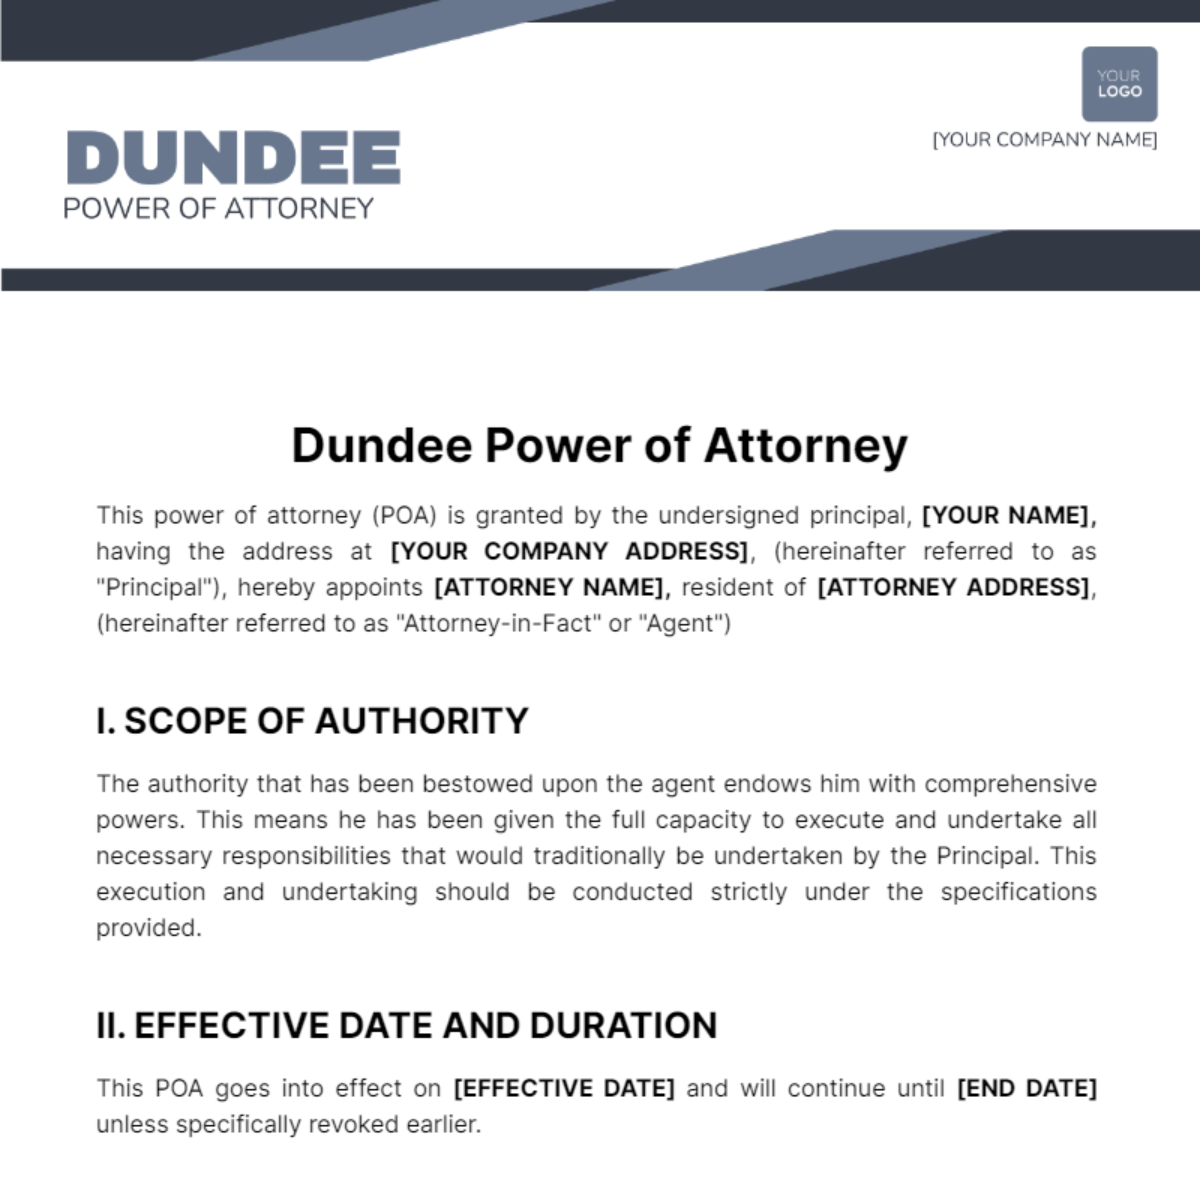 Dundee Power of Attorney Template